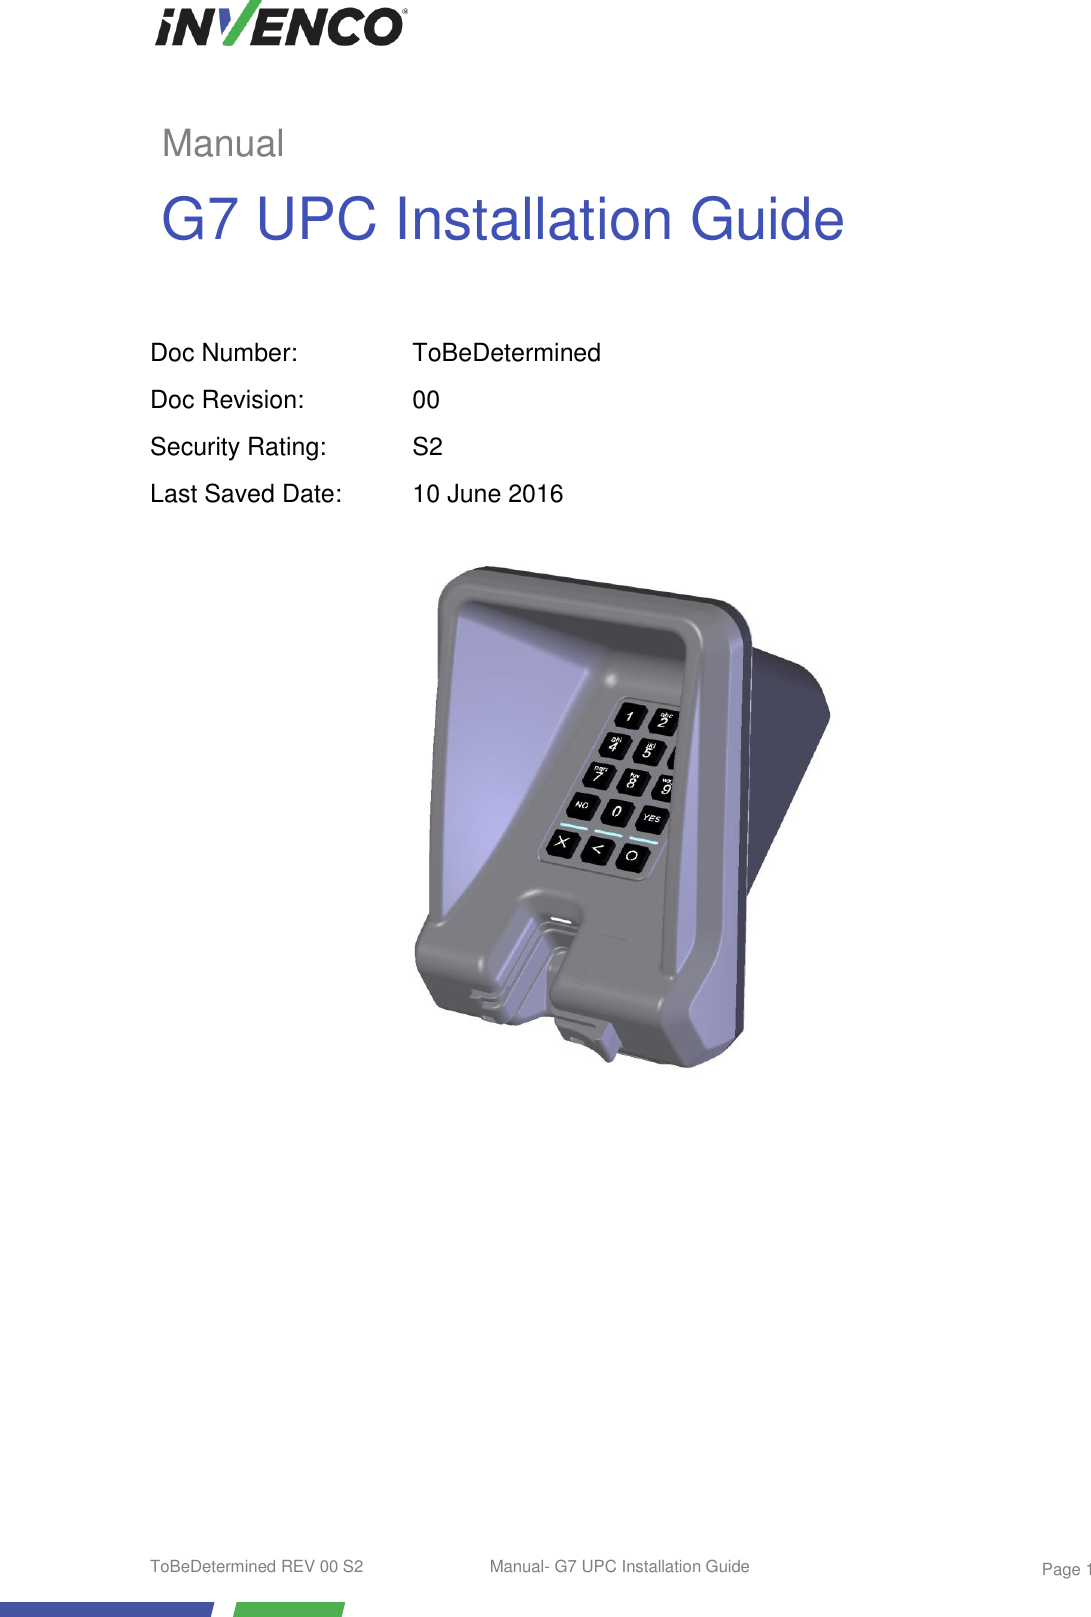  ToBeDetermined REV 00 S2  Manual- G7 UPC Installation Guide    Page 1                       Doc Number: ToBeDetermined Doc Revision: 00 Security Rating: S2 Last Saved Date: 10 June 2016 Manual G7 UPC Installation Guide 